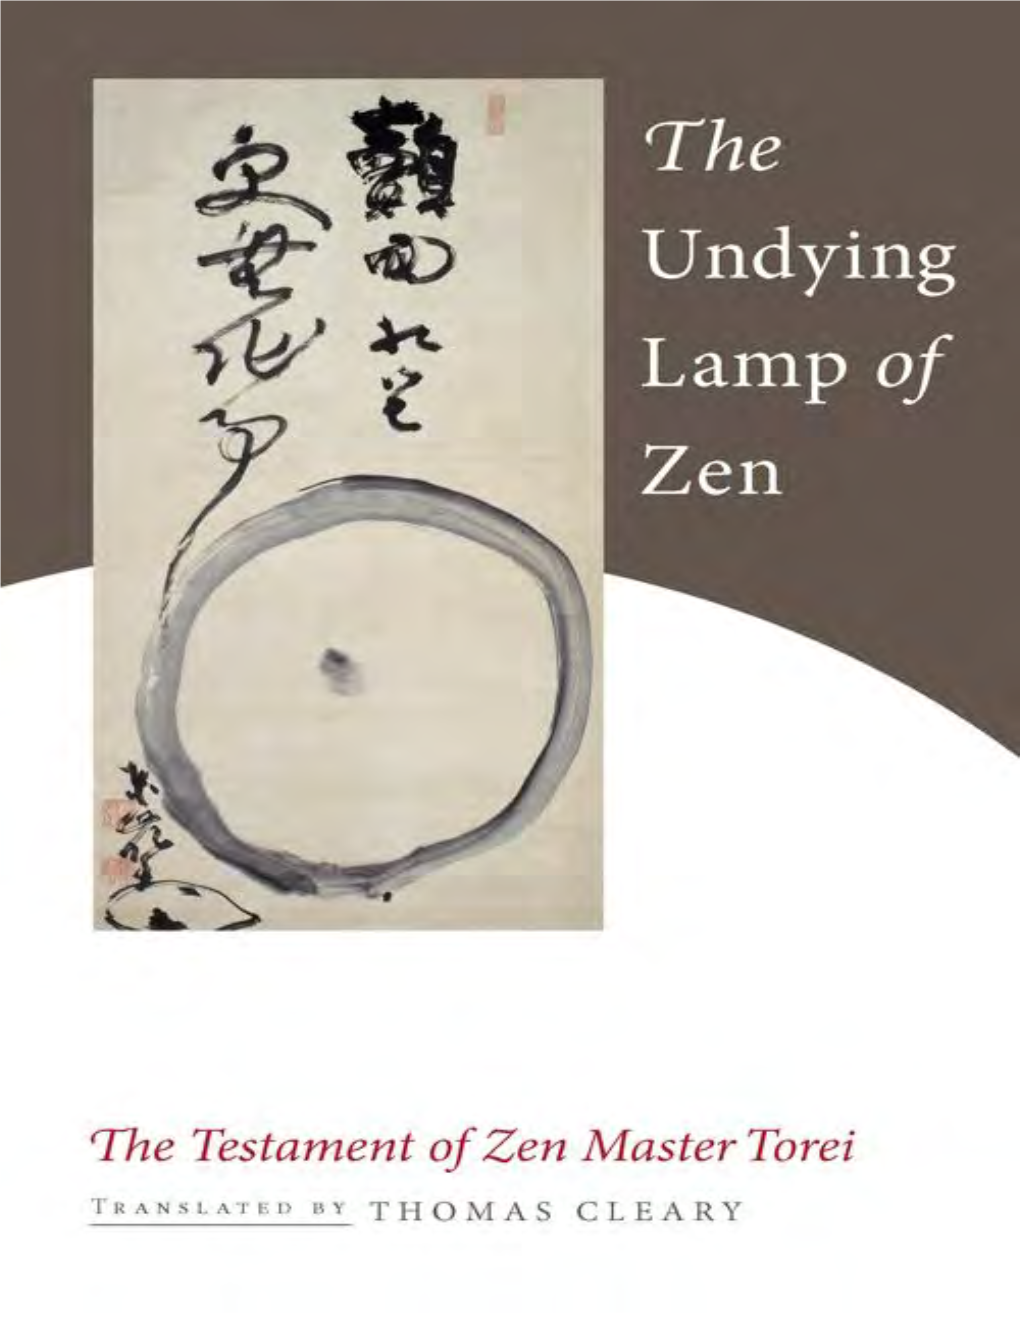 The Undying Lamp of Zen Is a Pure and Powerful Distillation of Zen Doctrine and Practice Written by Torei Enji (1721–1792), a Zen Master and Artist